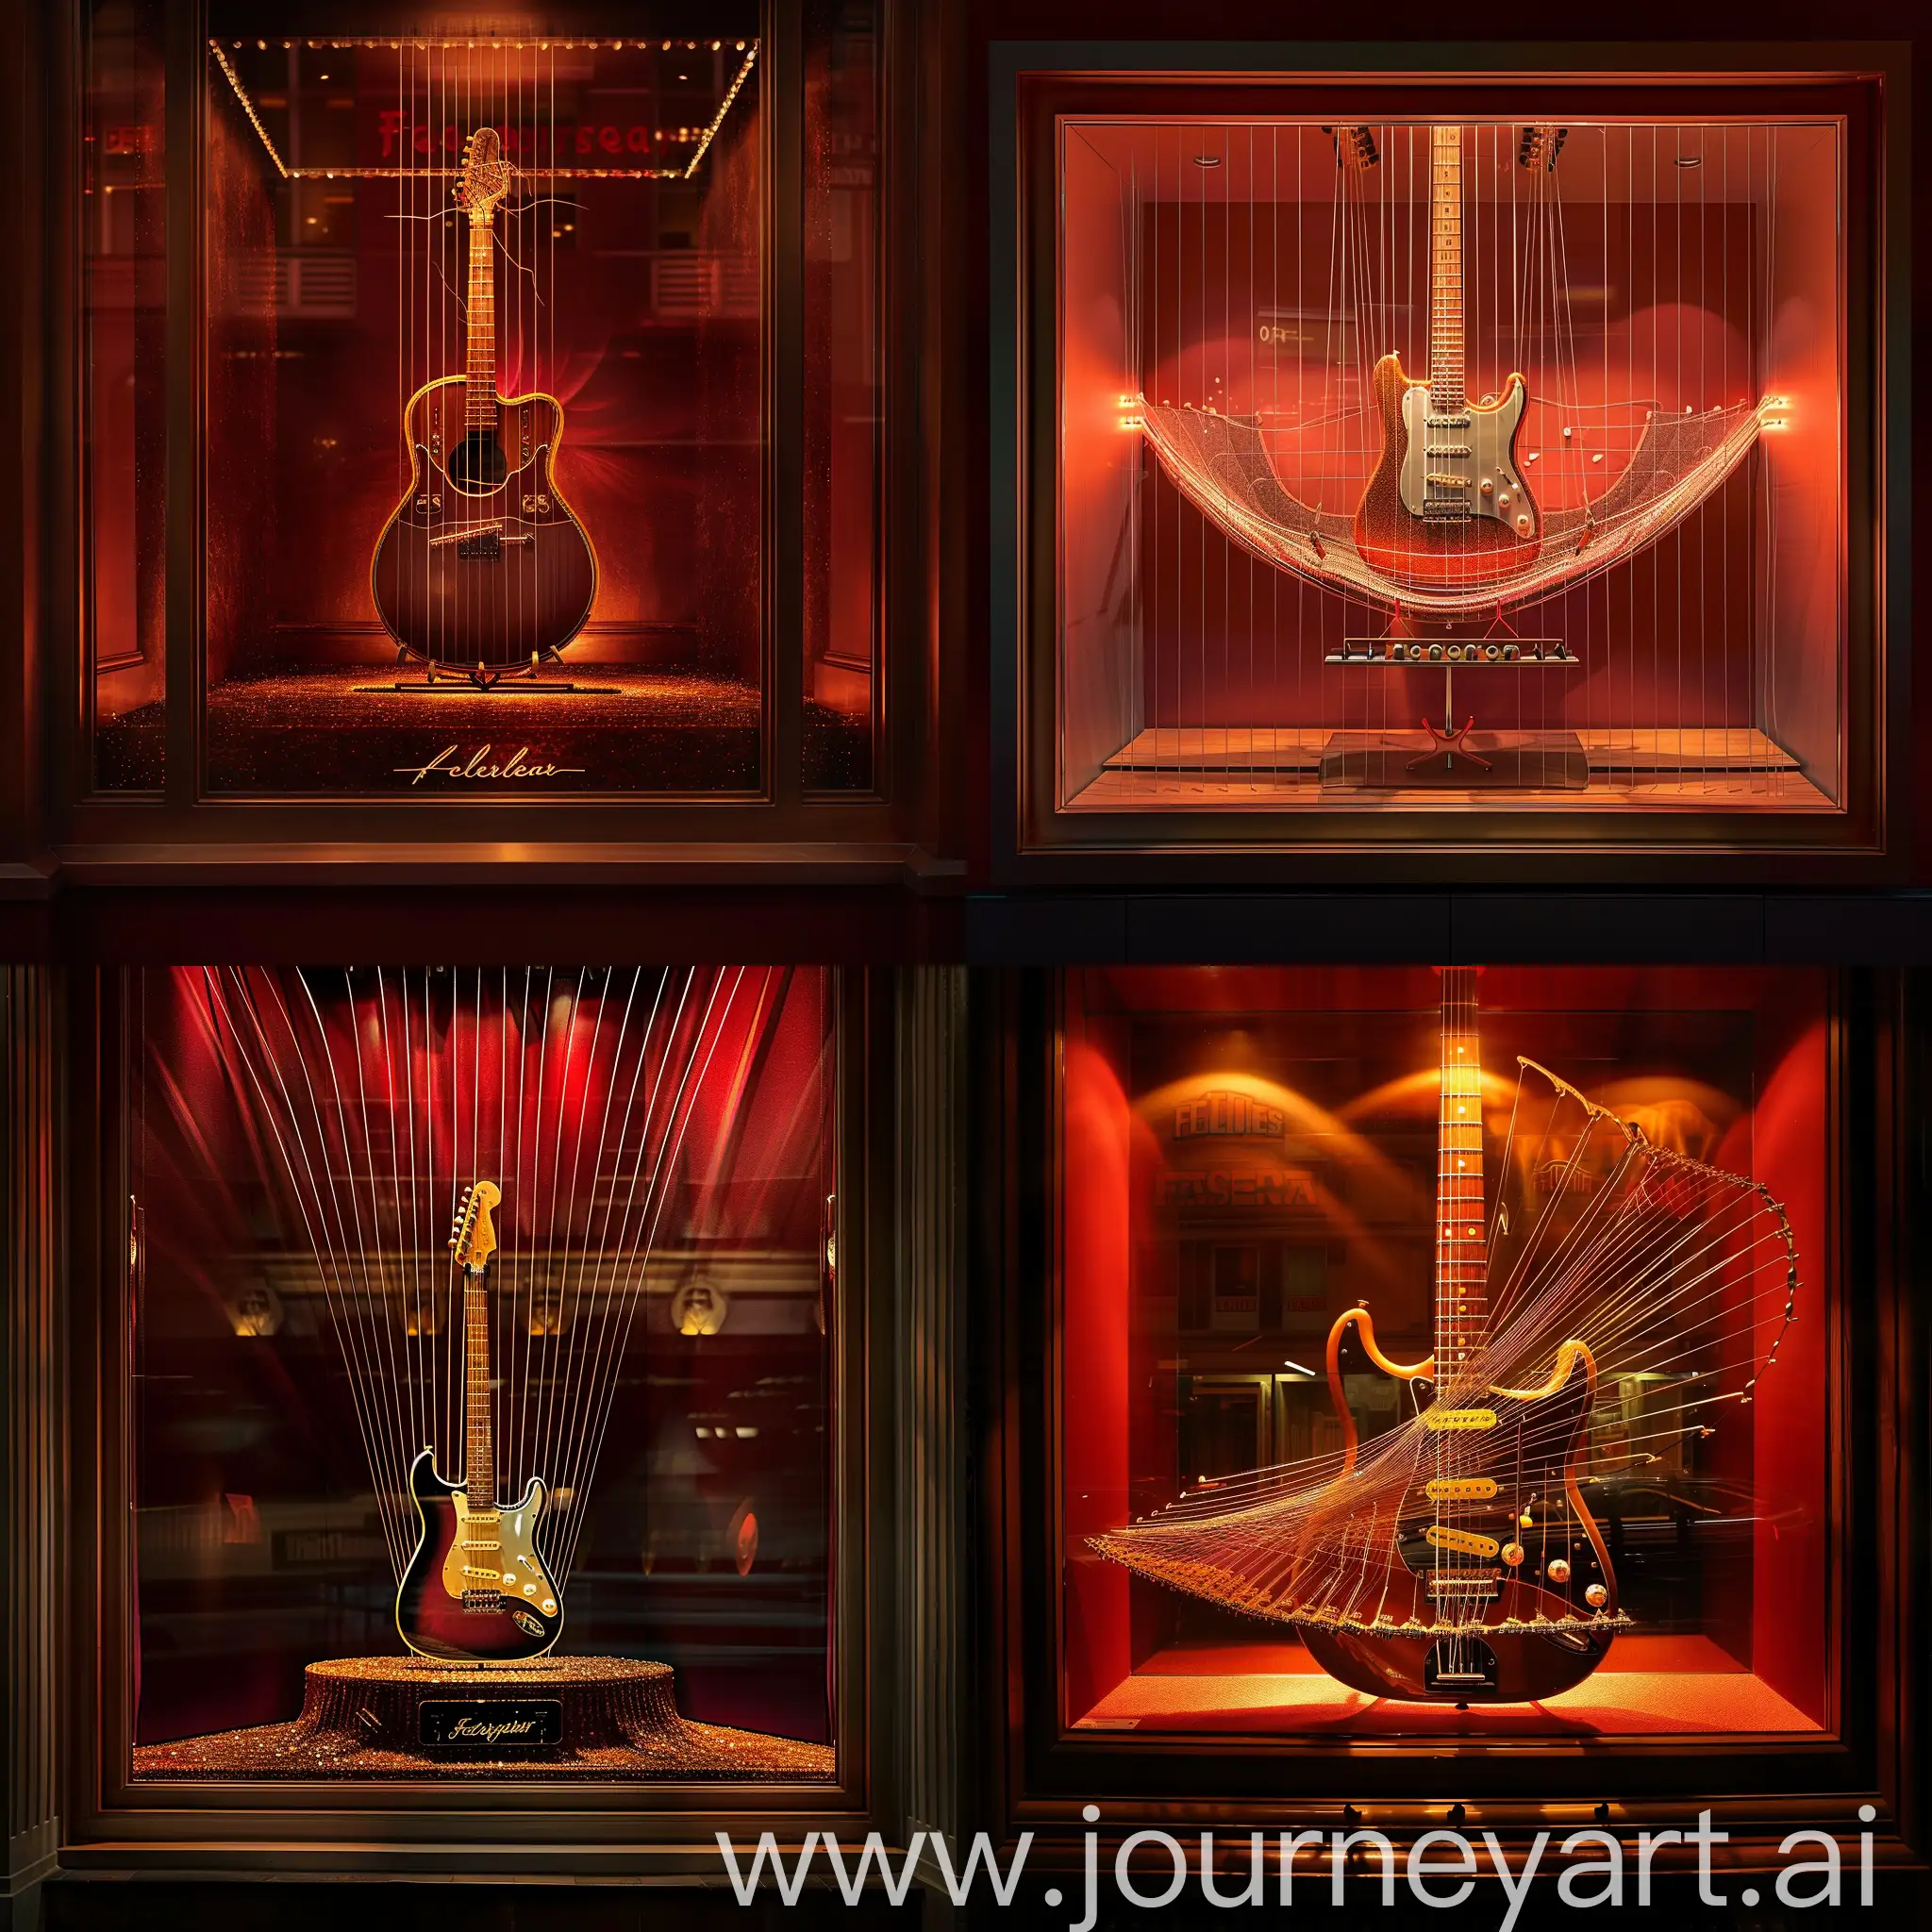 A Fender Guitars shop window  with a single guitar on its own stand, the strings of the guitar  extend from the tuning keys to the ceiling of the window  as if it has no end and resembles a musical amphitheater. The background is dark red with warm lighting .